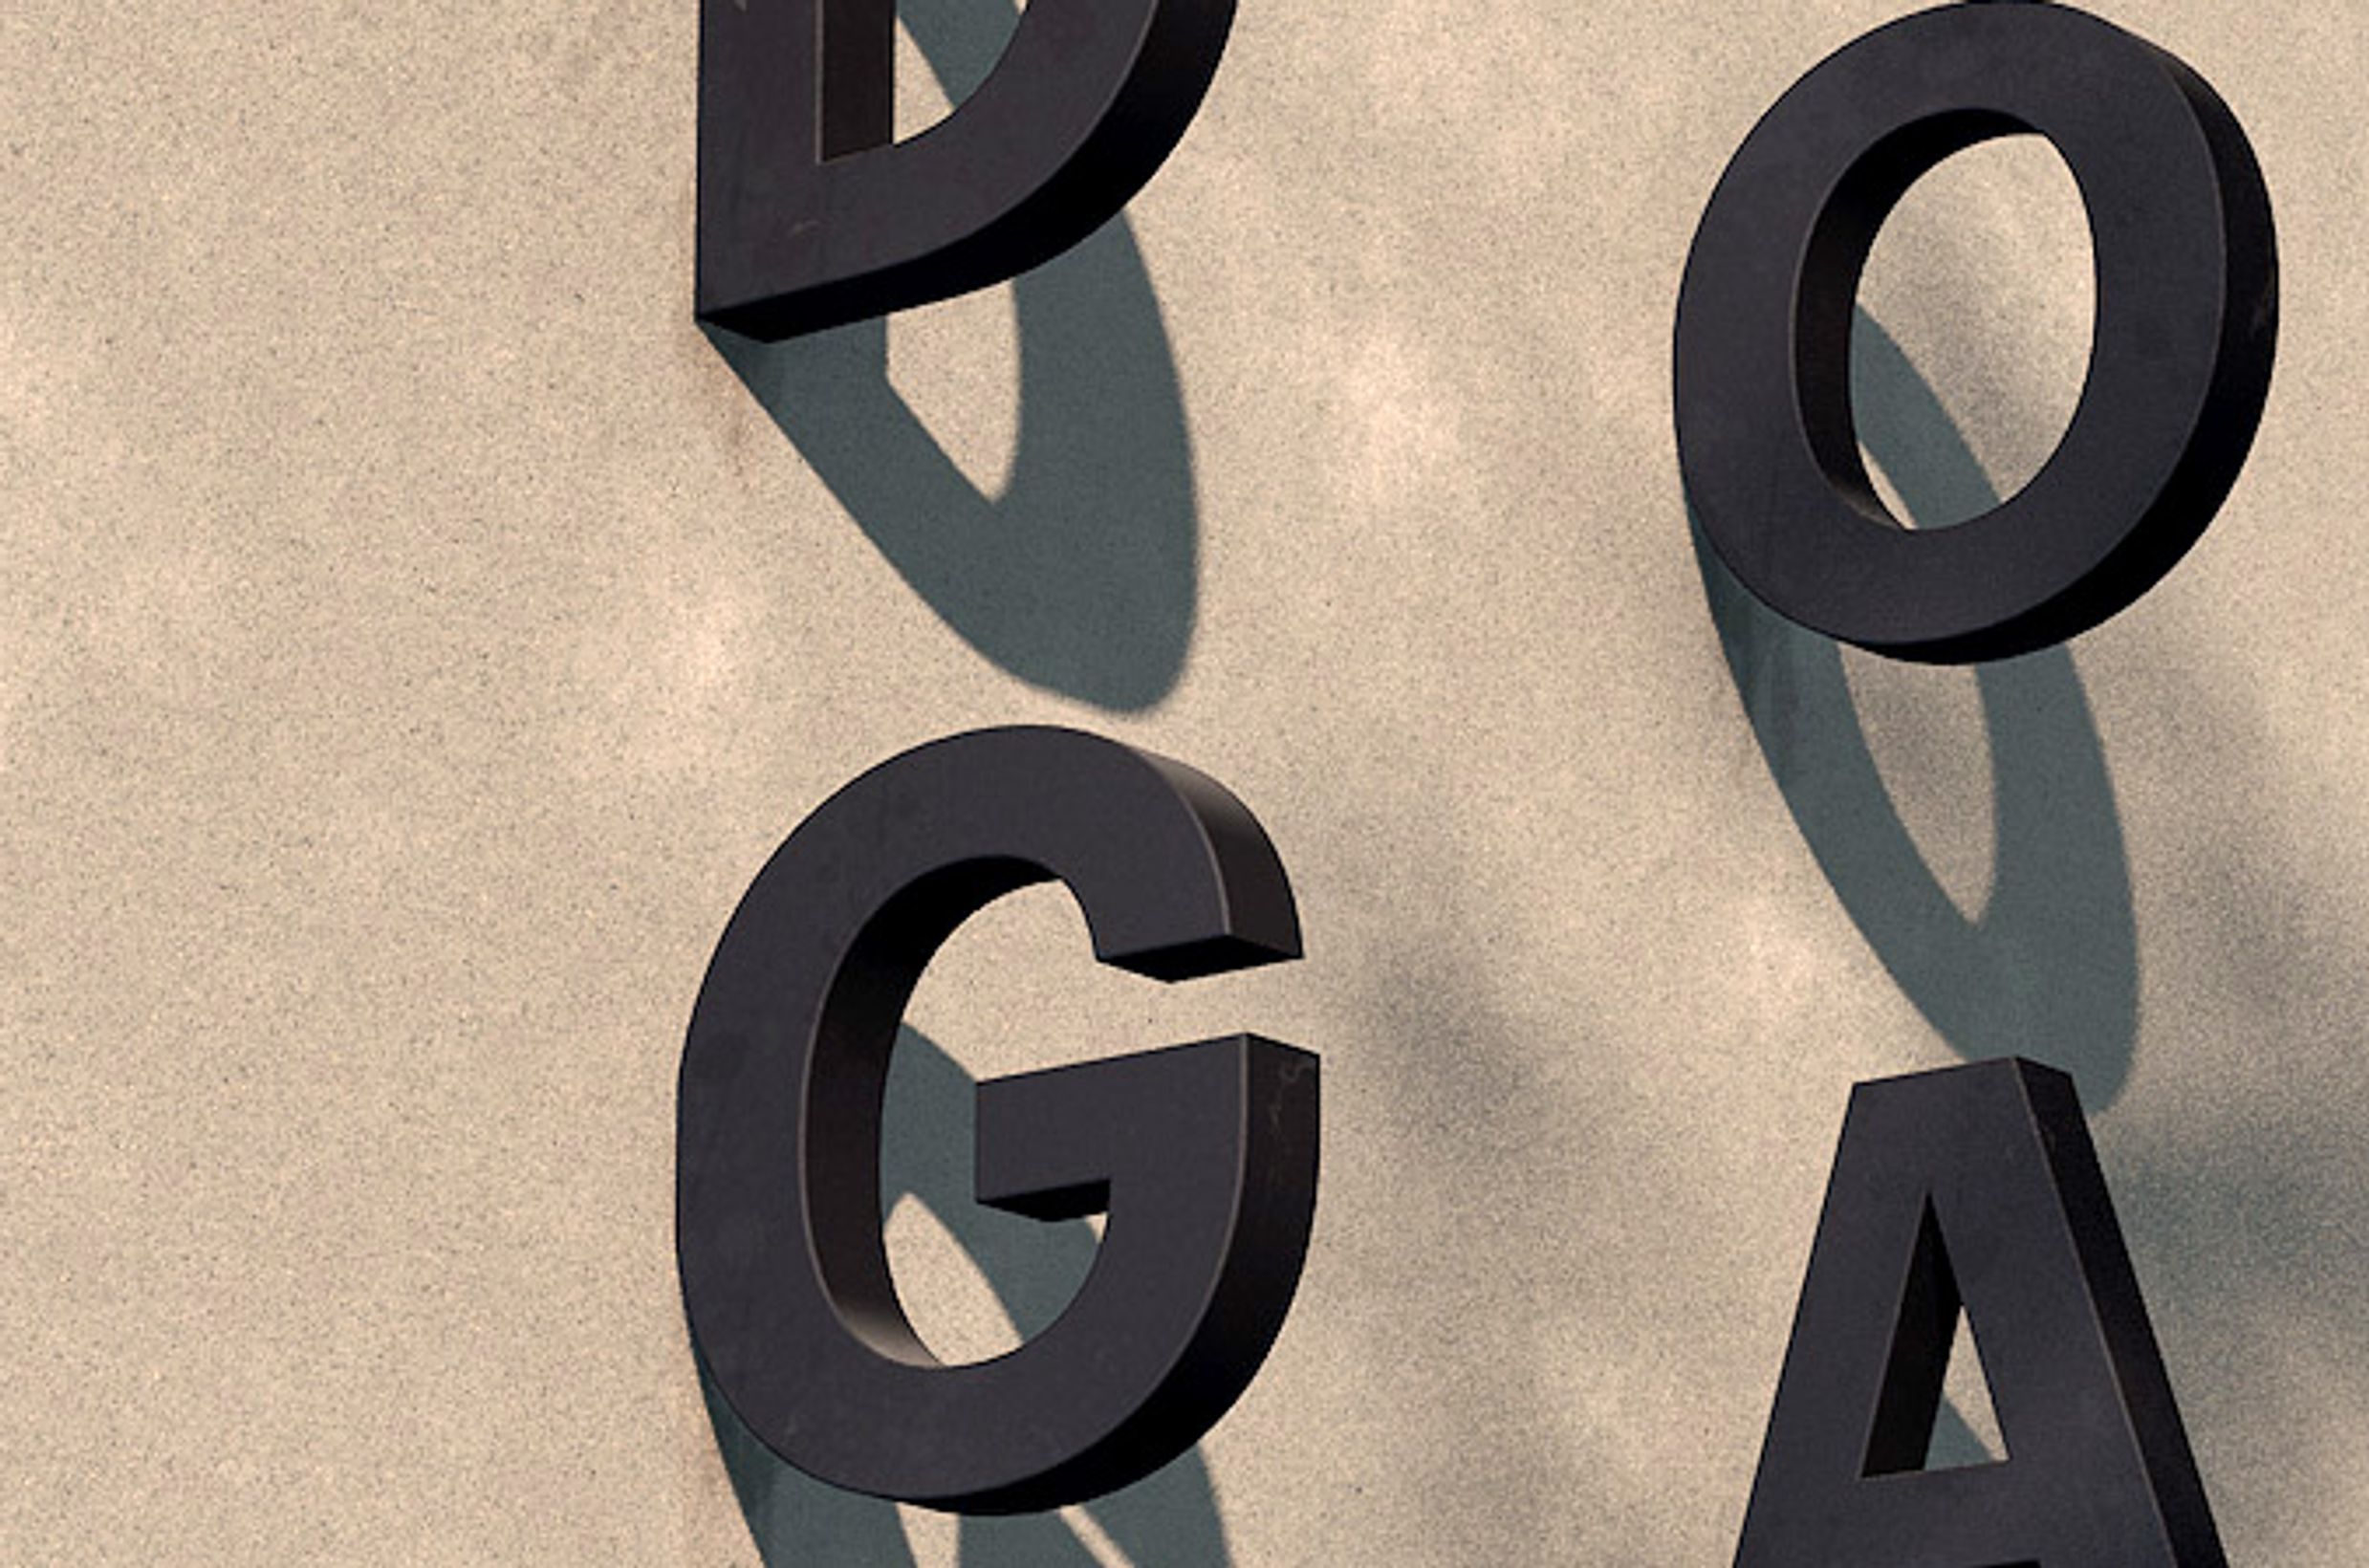 DOGA logo as signage on a beige wall. The font is sans serif.